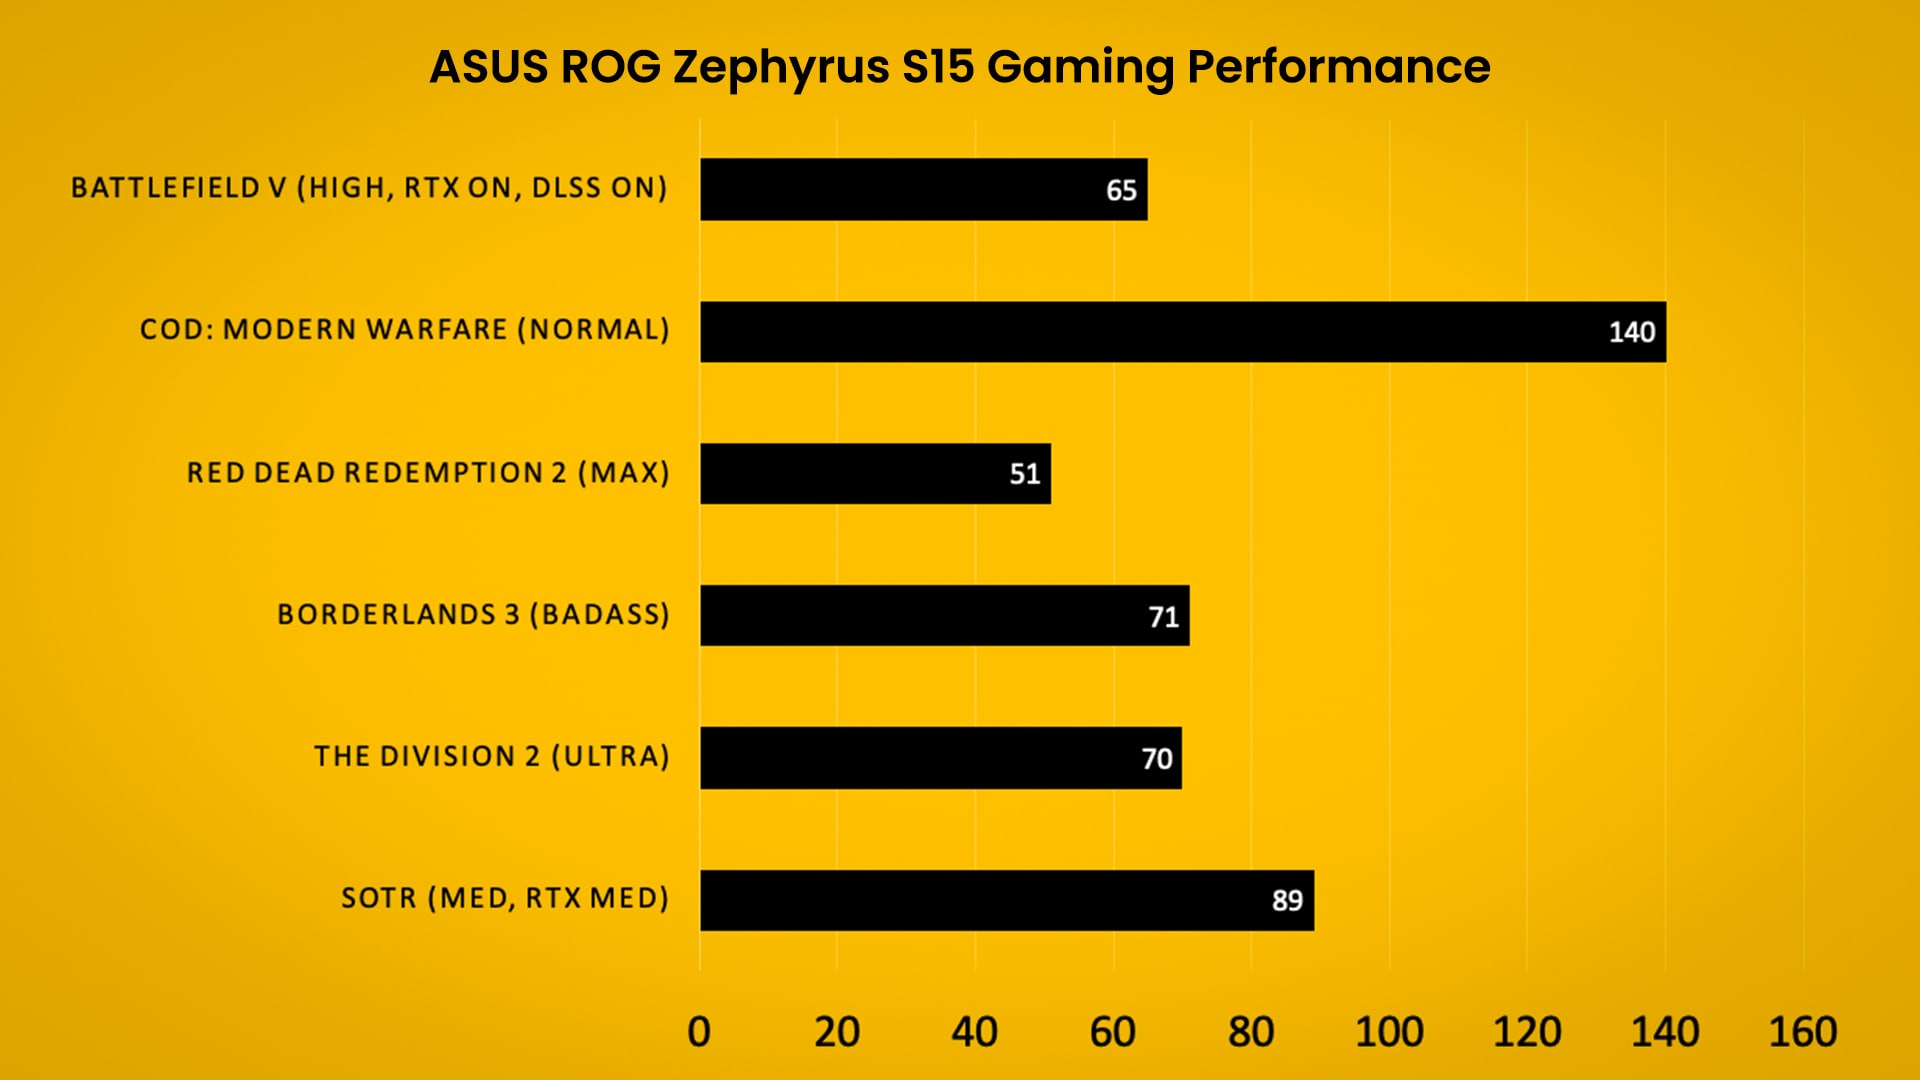 Gaming performance is excellent, but even with a 2080 Super Max-Q, there are few games that can hit 120 fps at high settings. 60 fps is easily attainable, however. Competitive titles like CS: GO should see 300+ fps.